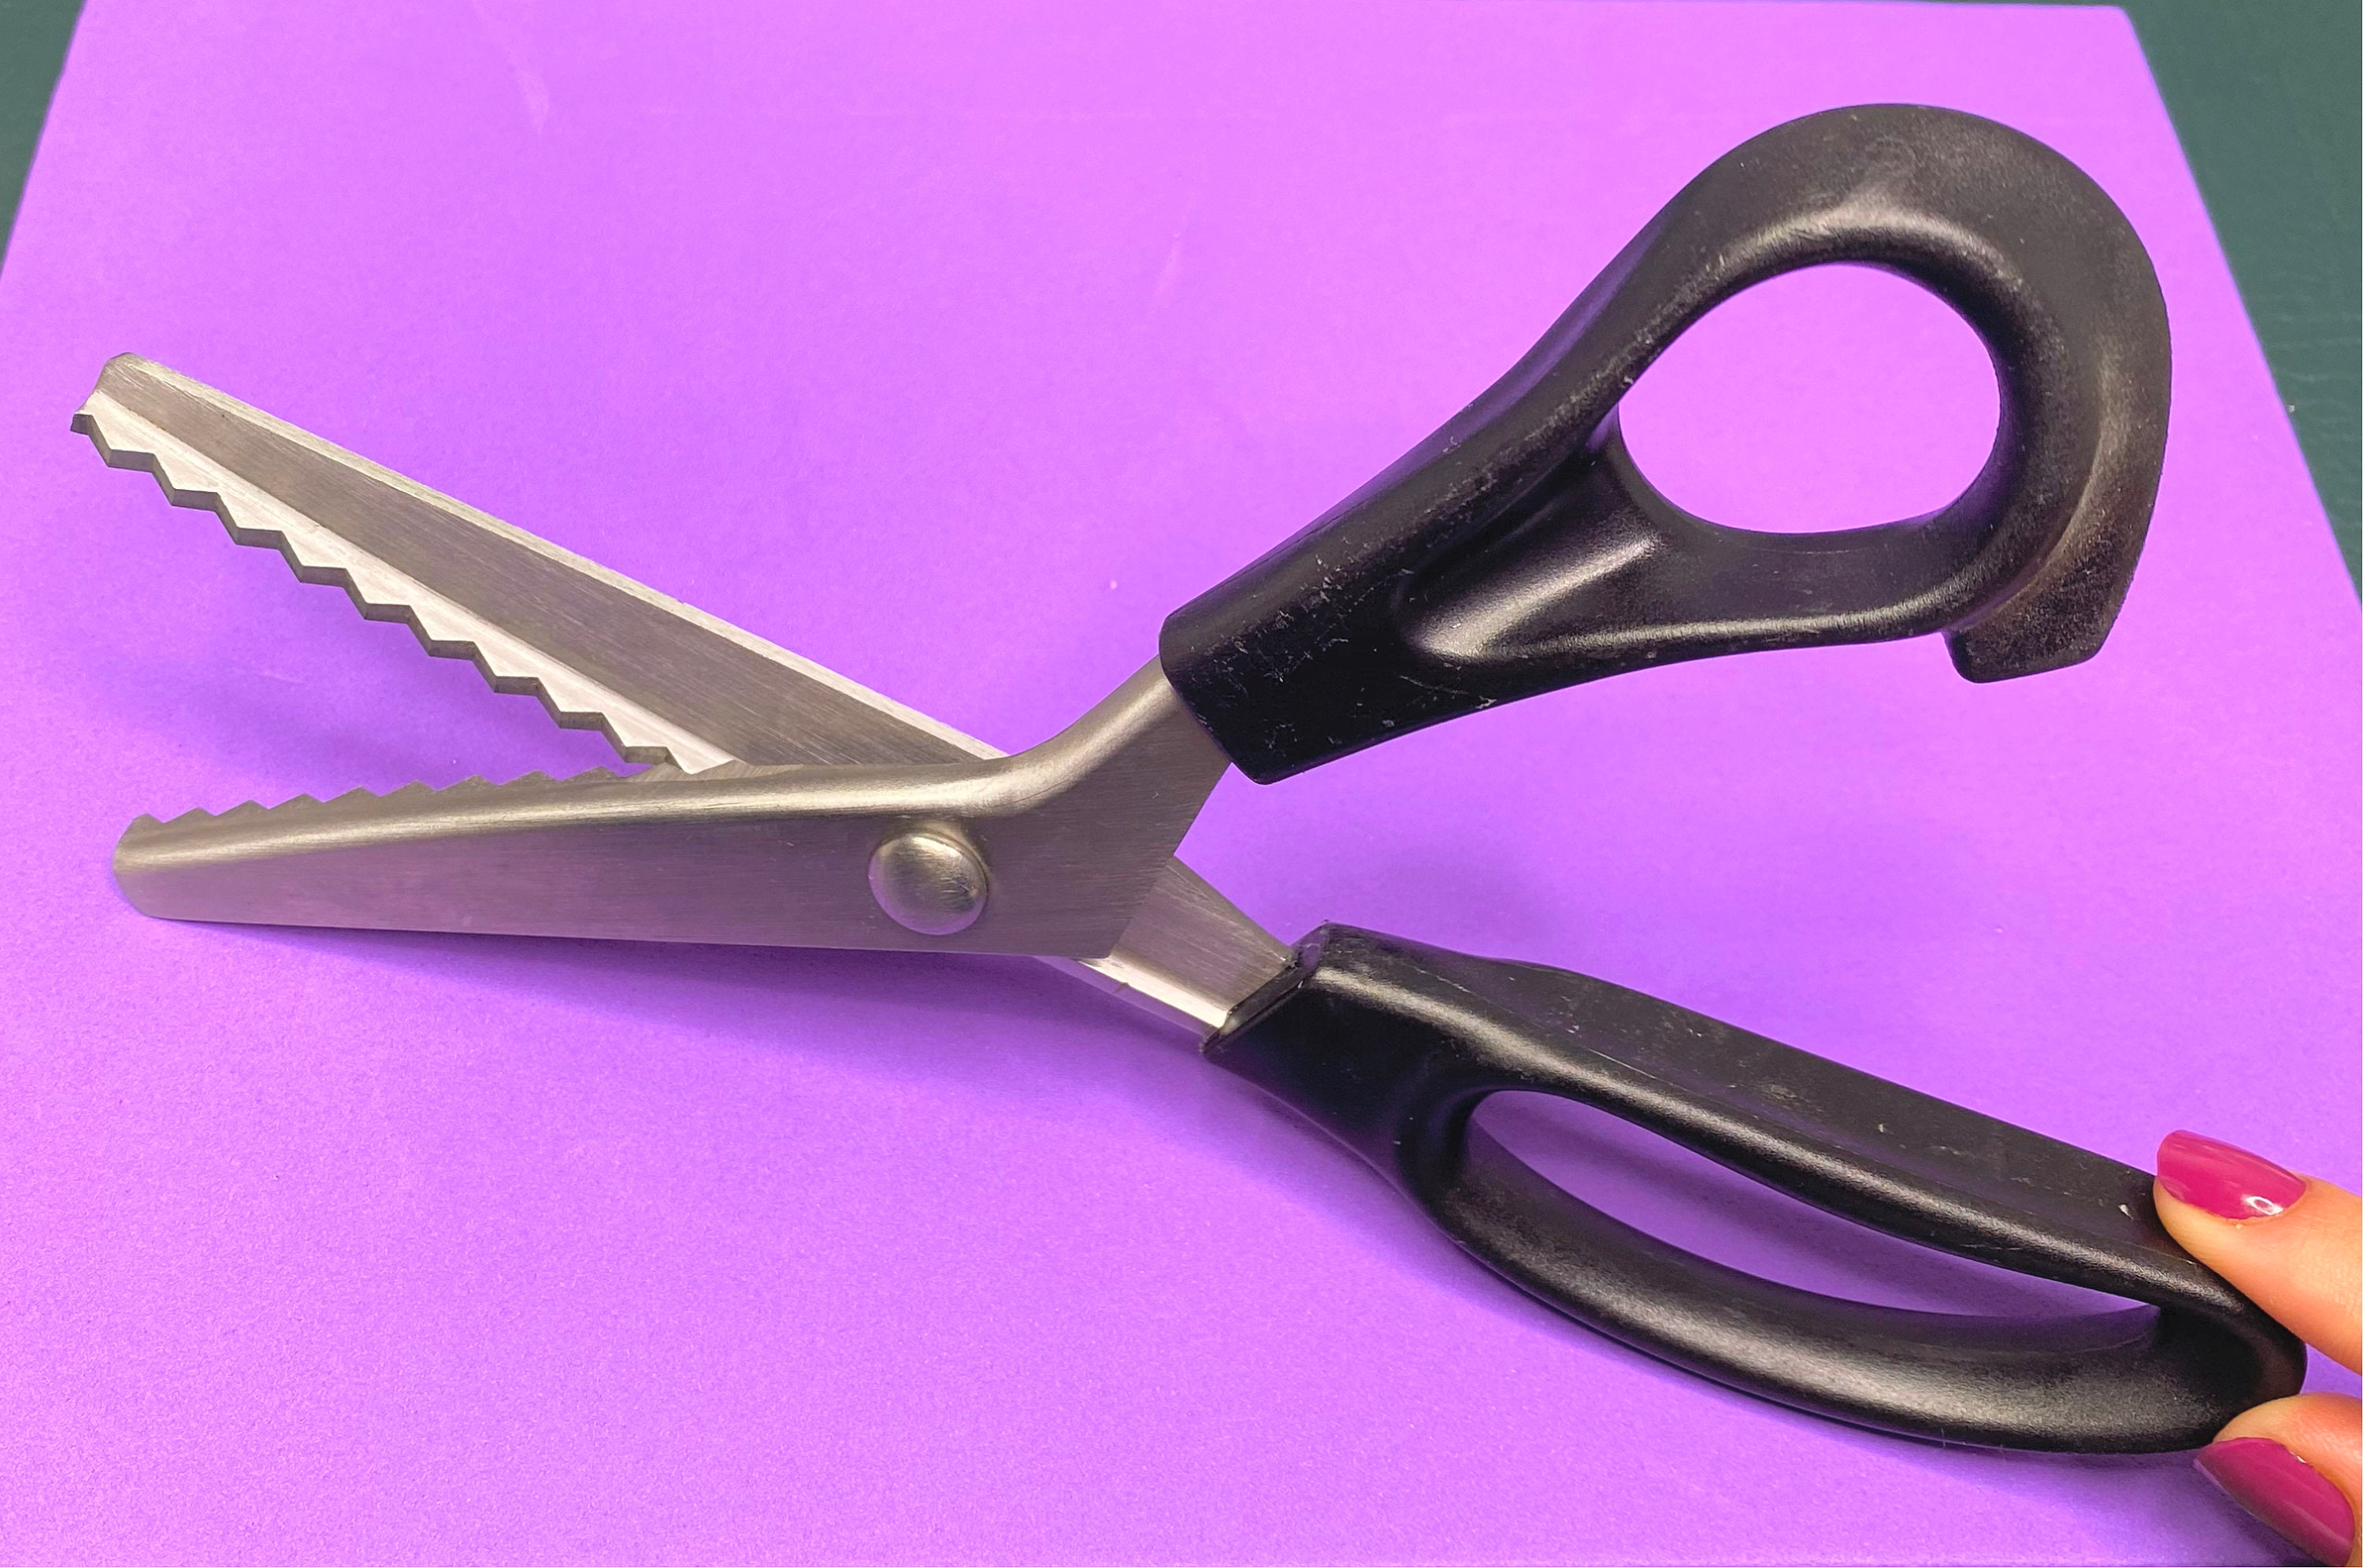 Professional Pinking Shears, 9 Stainless Steel Fabric Pinking Shears, by Better Office Products, Dressmaking Scissors, Zig Zag Cut Scissors, Serrated